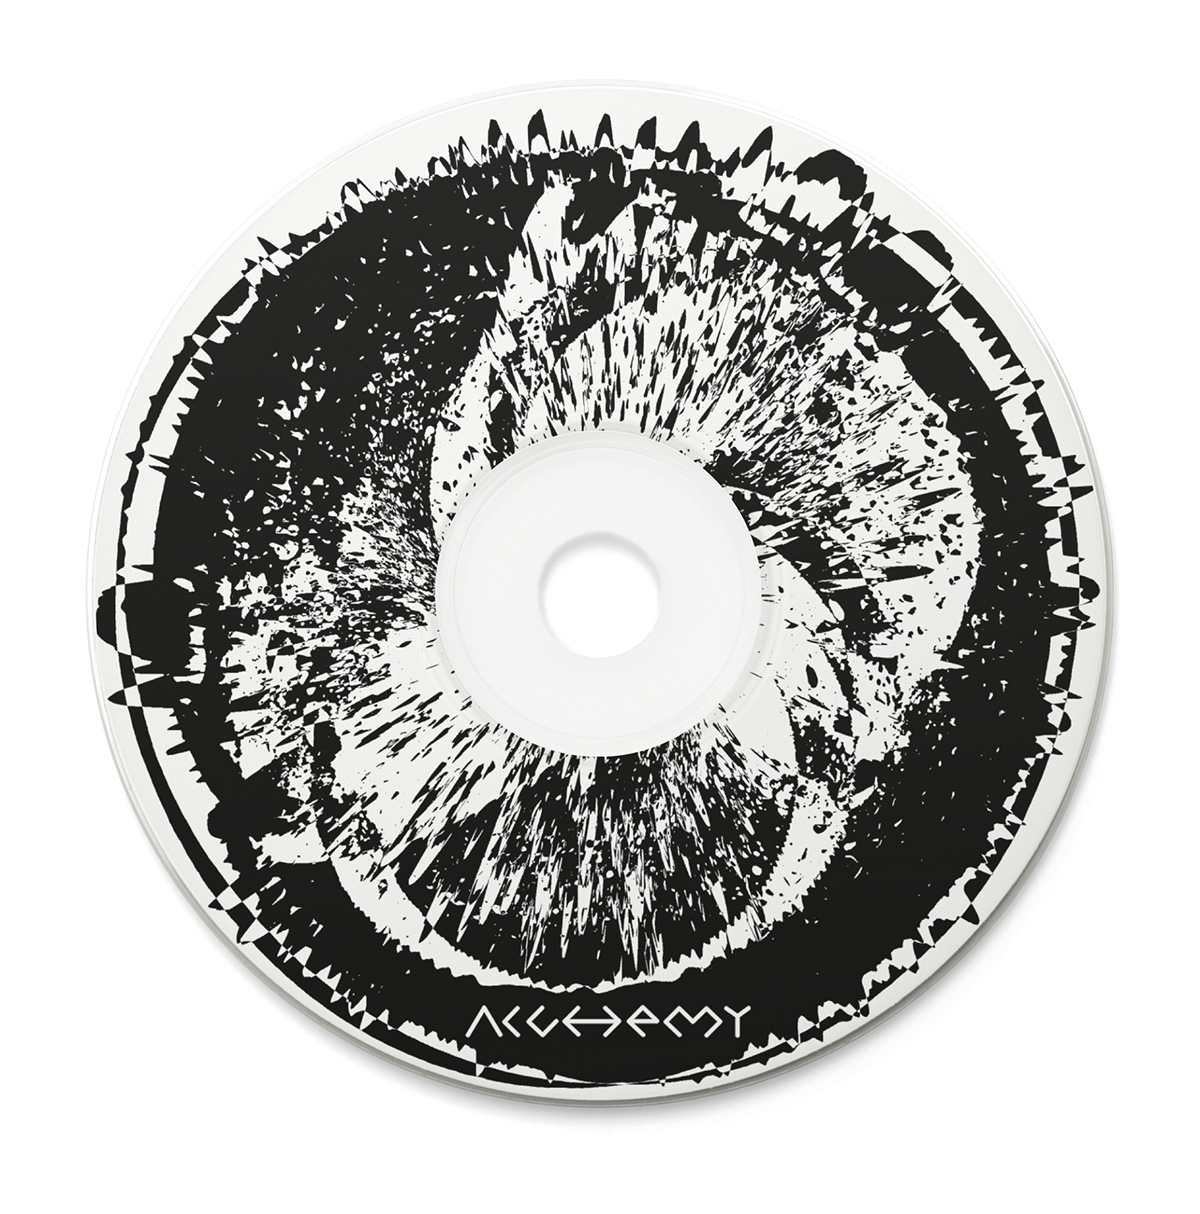 cd Album surrealism wallpaper black and white texture abstract geometry 3D cinema 4d